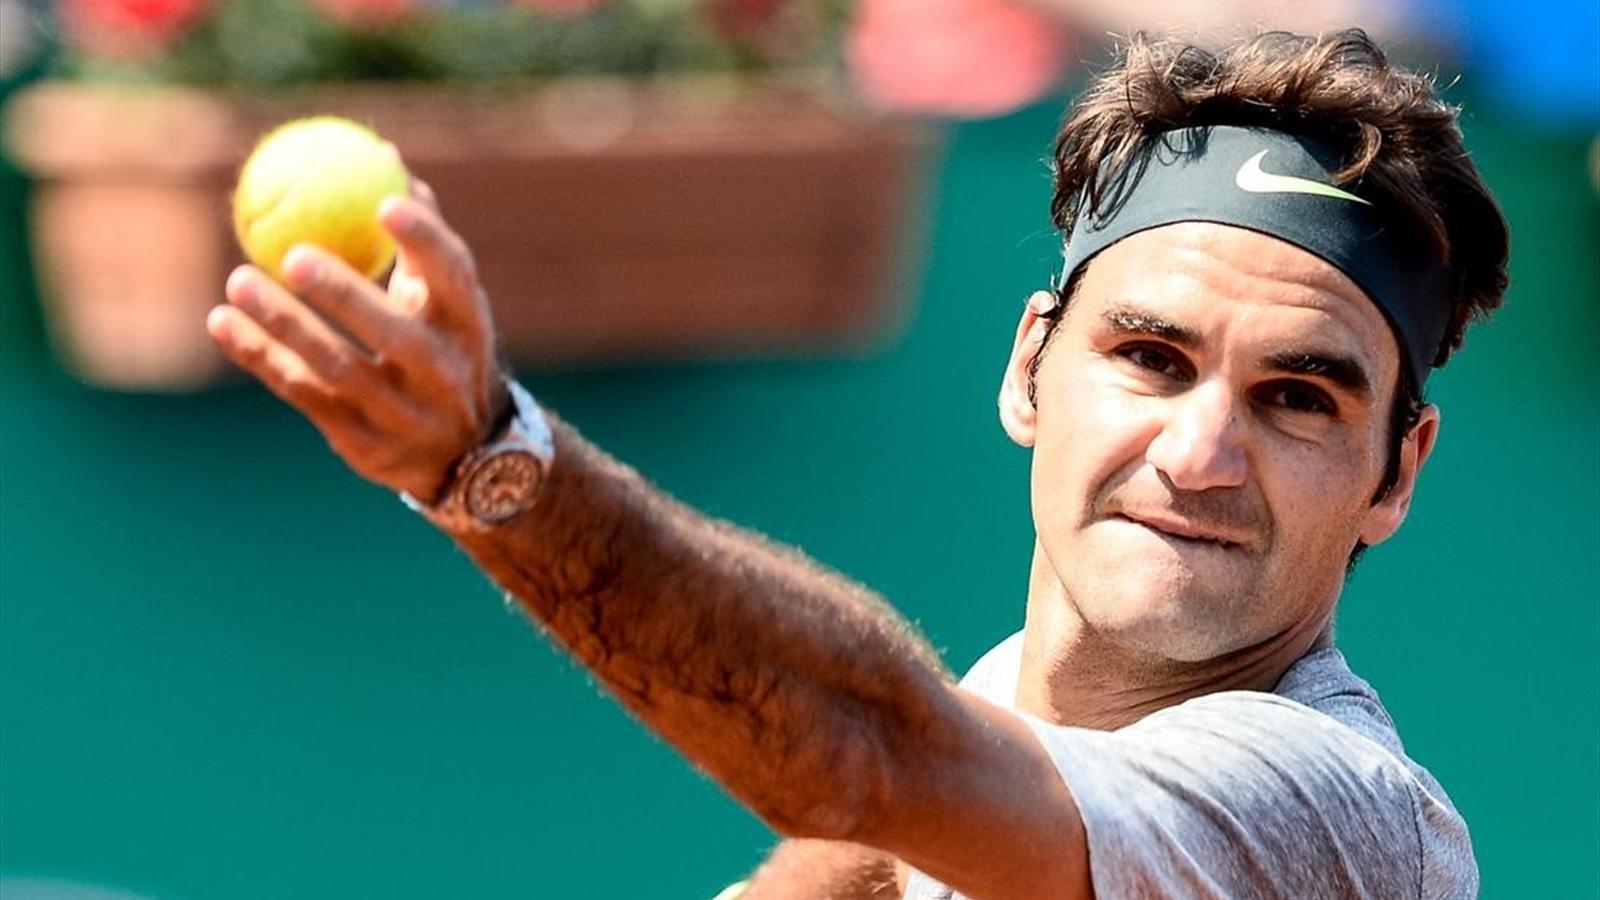 Roger Federer Moves into Quarterfinals: Istanbul Open | Movie TV Tech Geeks News